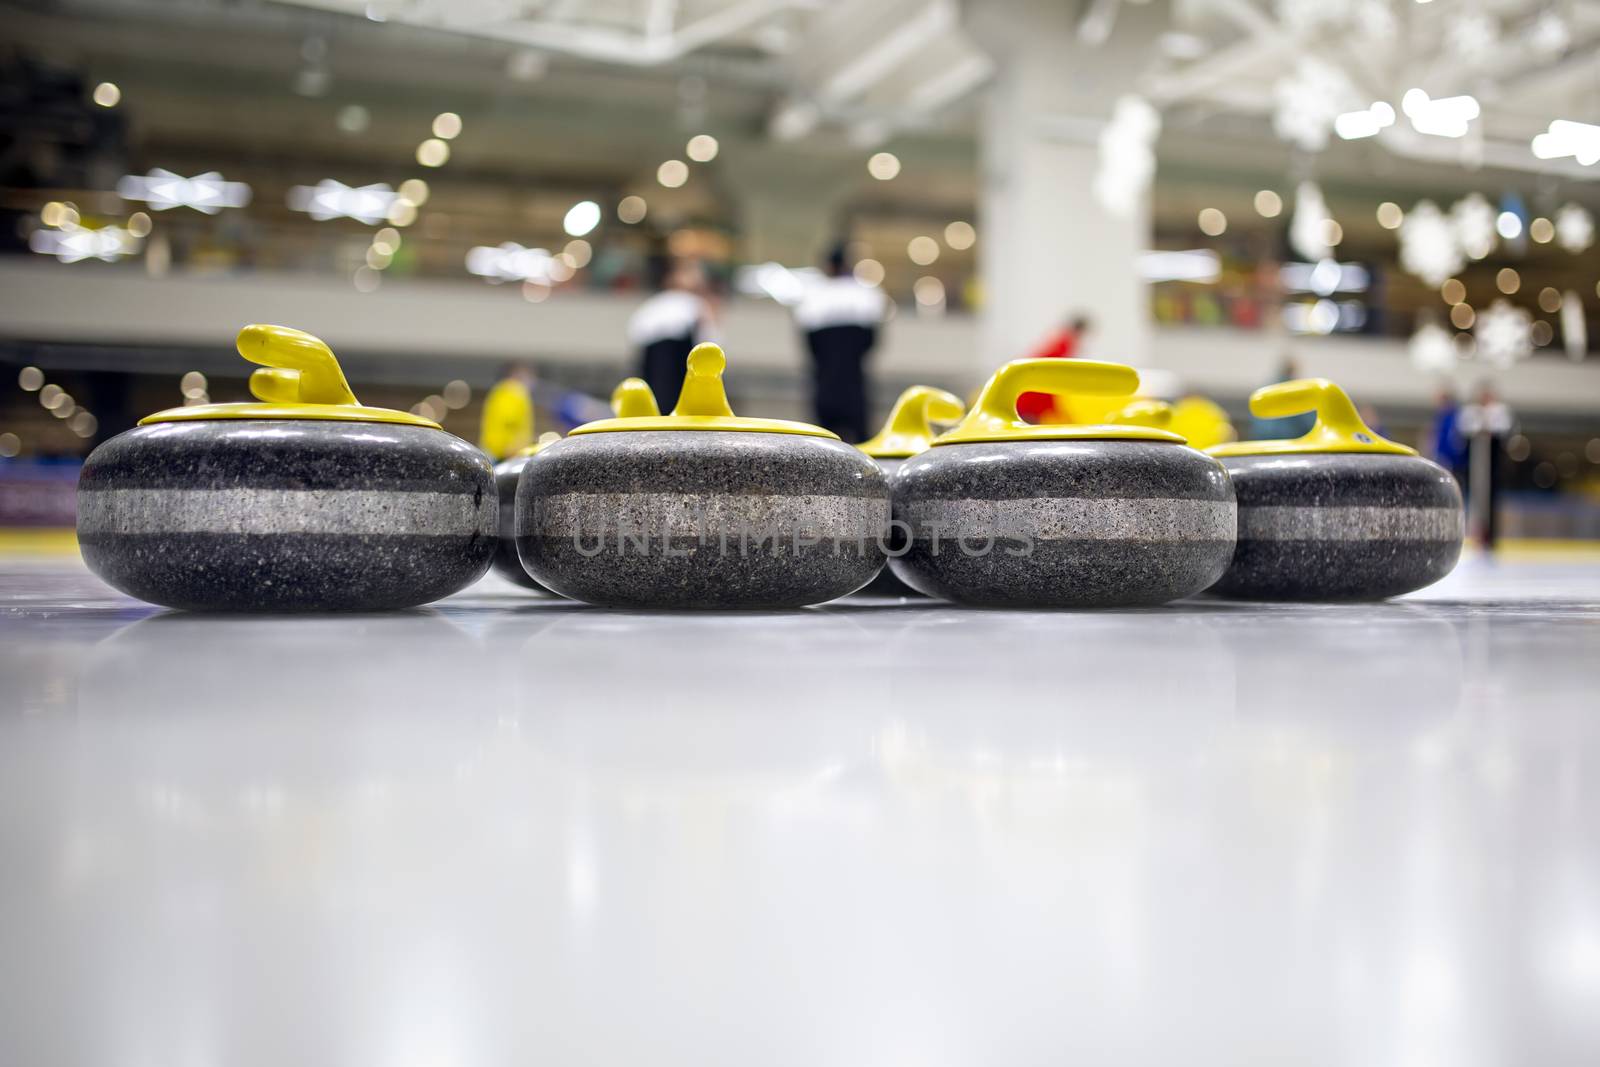 The curling stone or rock is made of granite with yellow handles lie on the ice